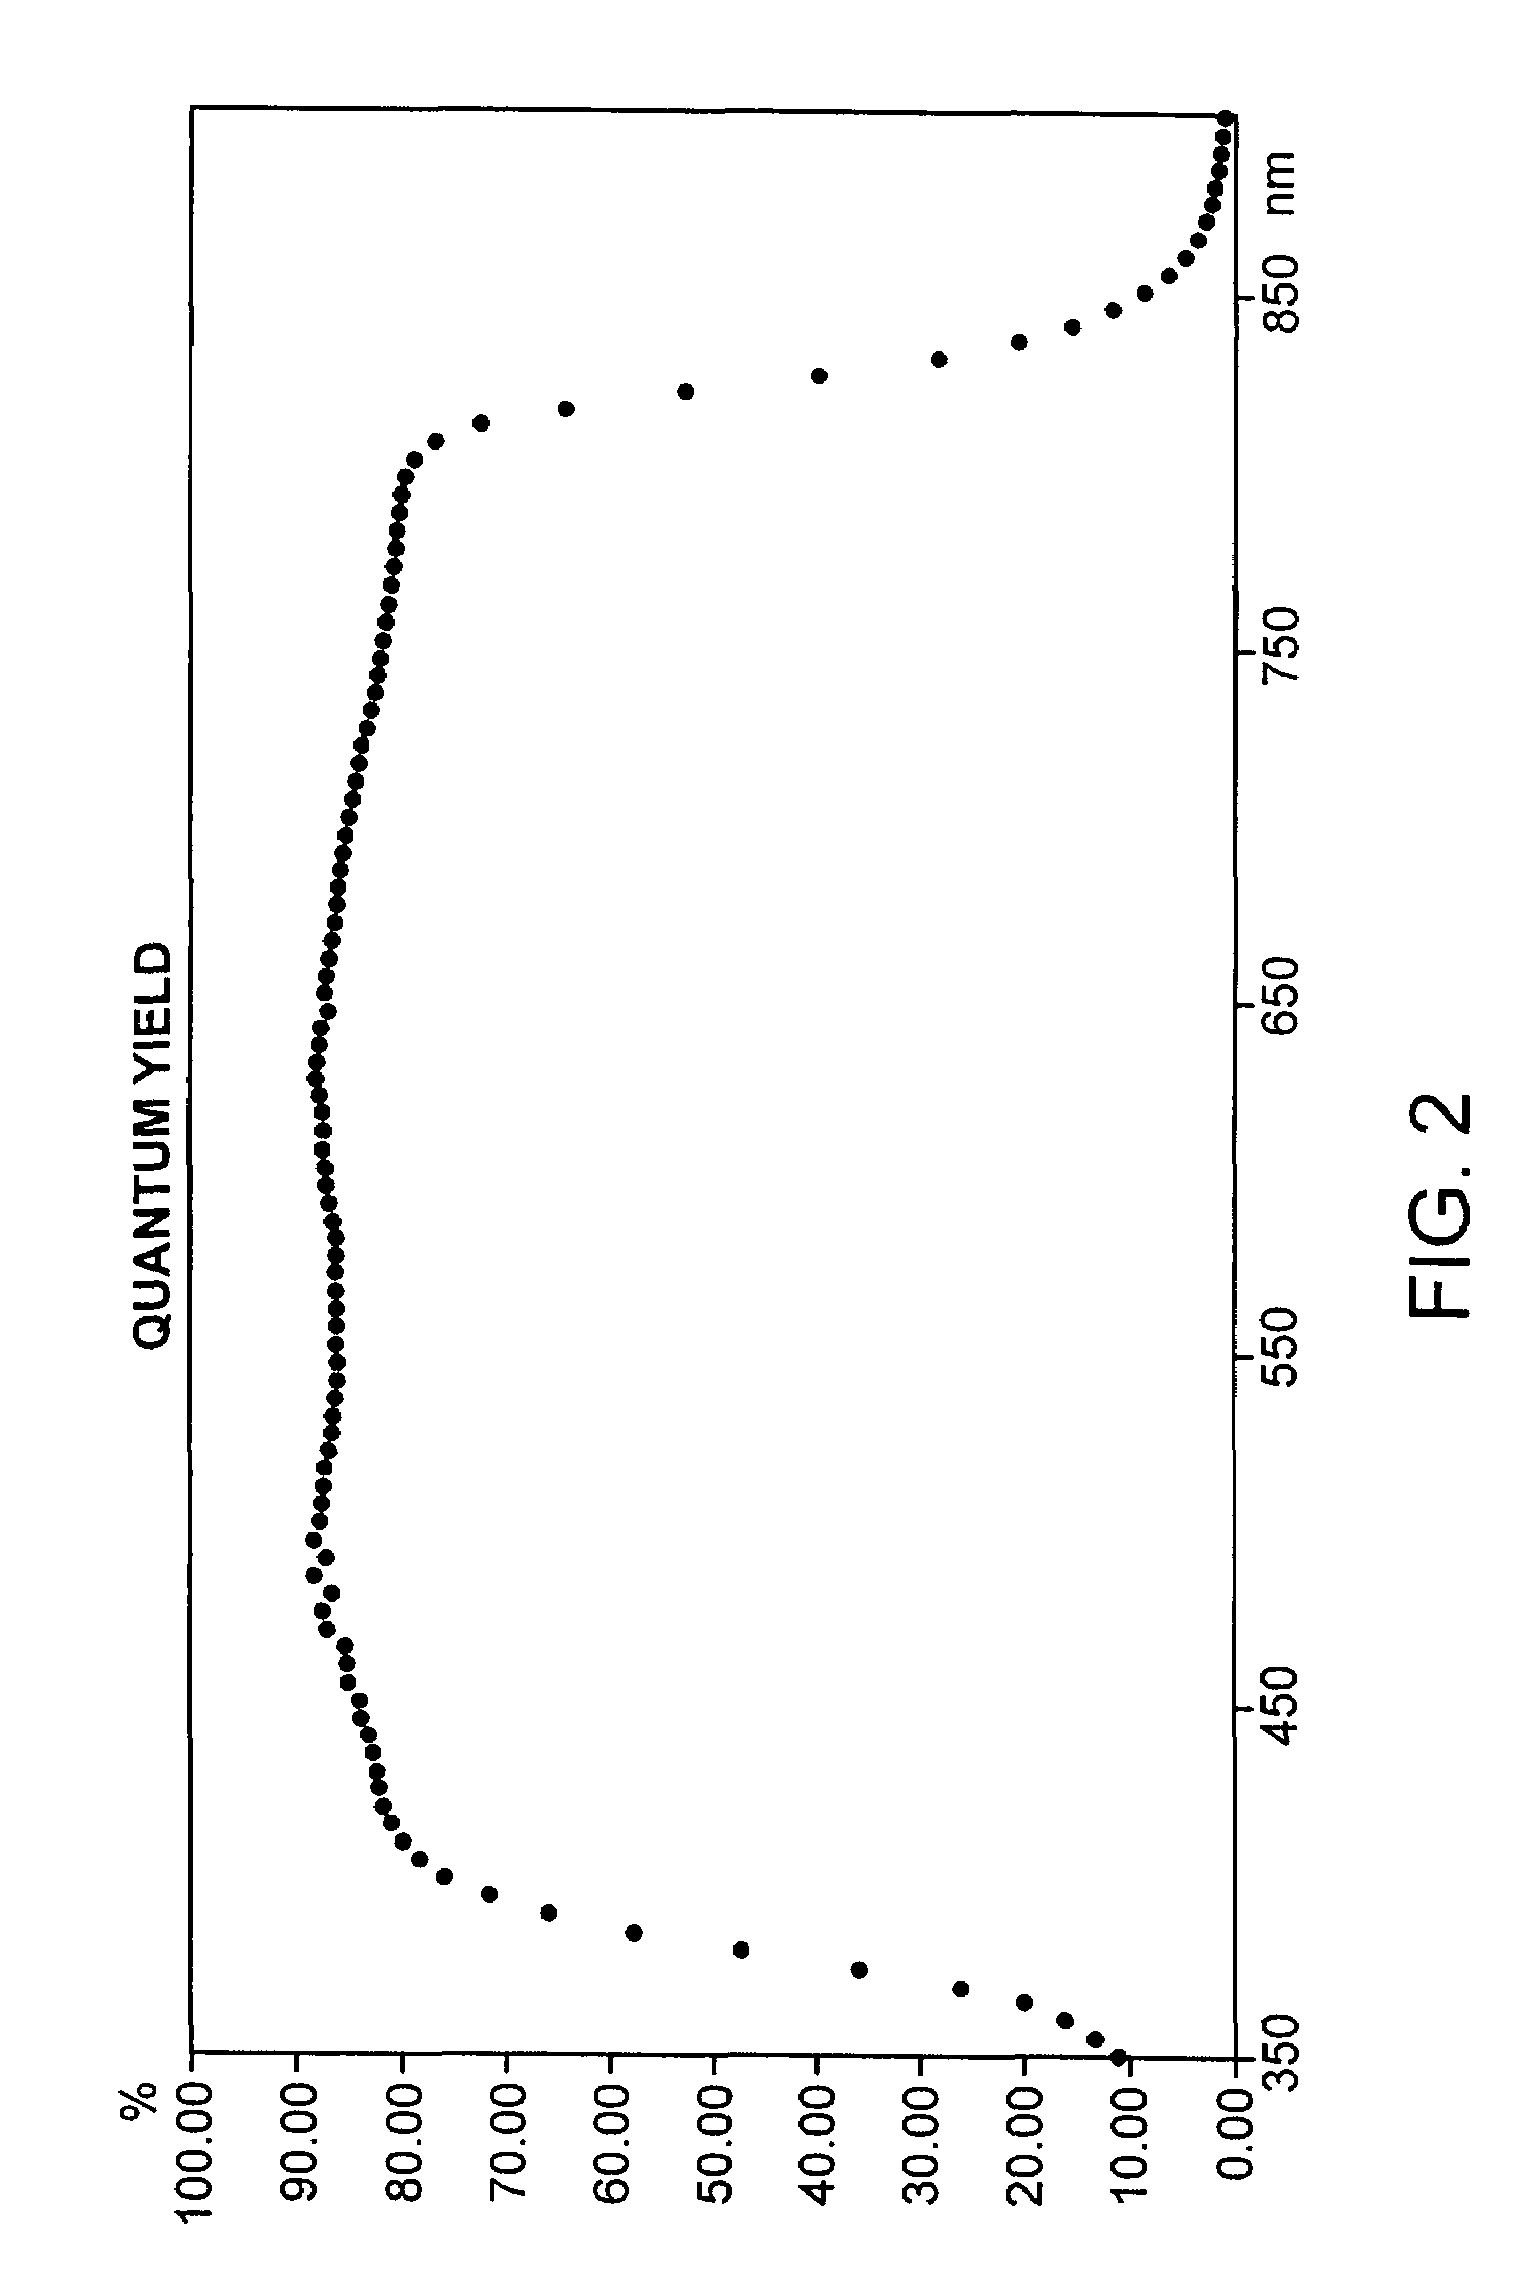 Method of the application of a zinc sulfide buffer layer on a semiconductor substrate